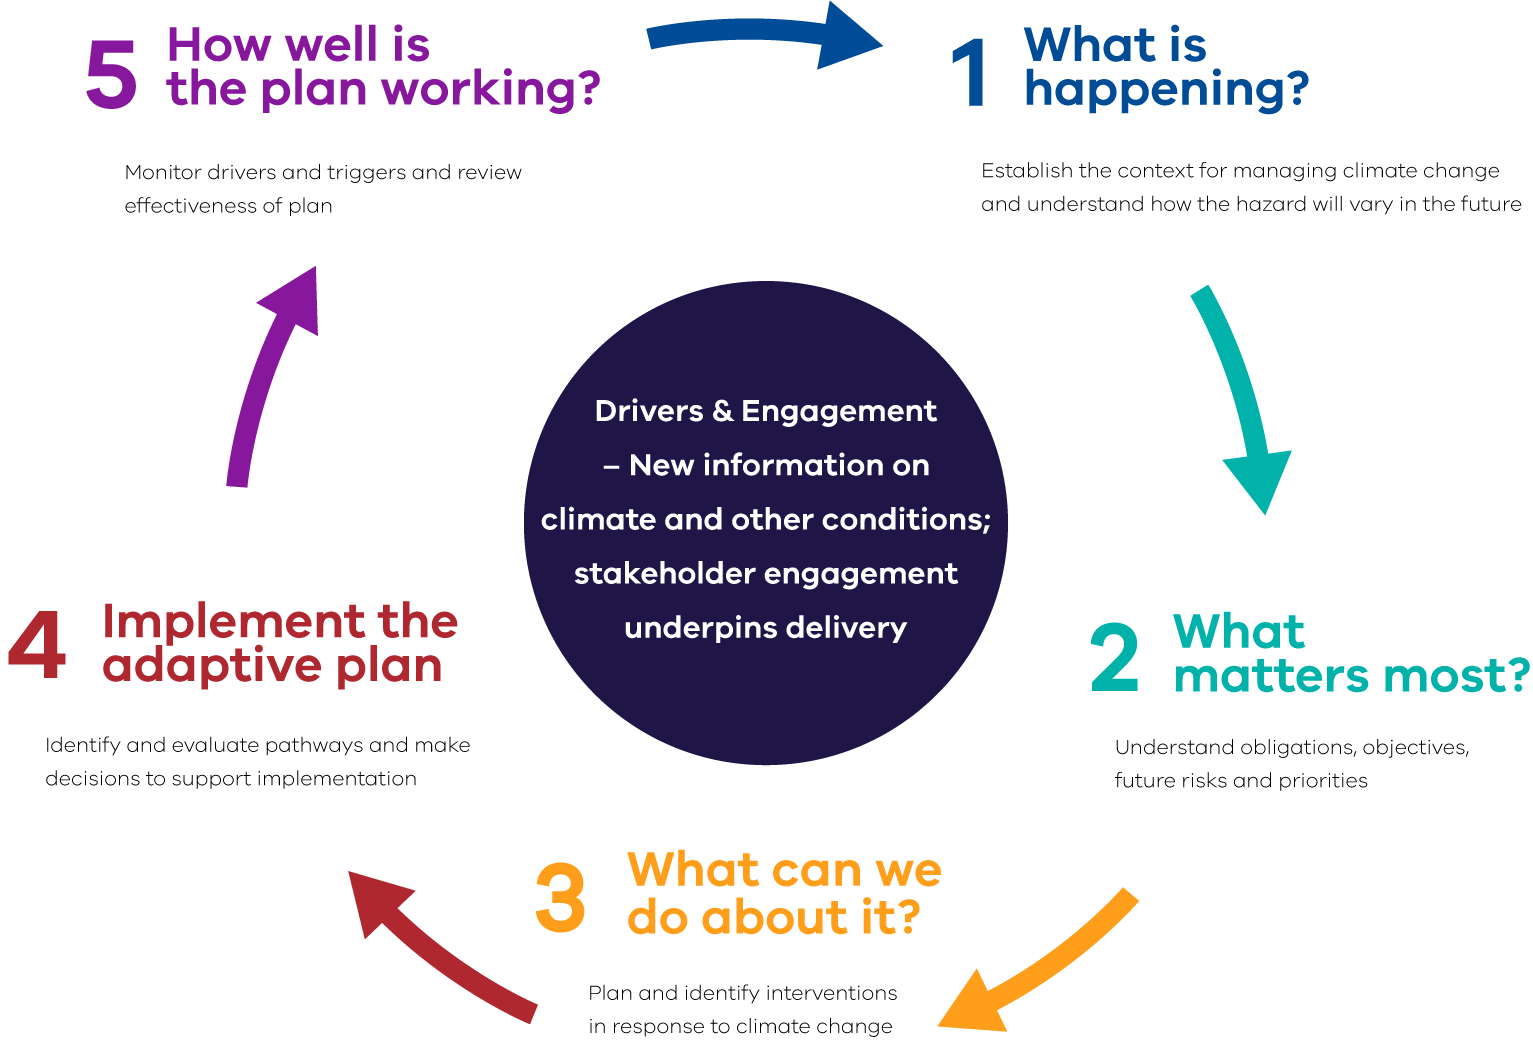 A framework for adaptive planning for responses to climate change and other sources of uncertainty. Steps include what is happening, understanding what matters most, what we can do about it, implementing the adaptive plan, and monitoring how well the plan is working.